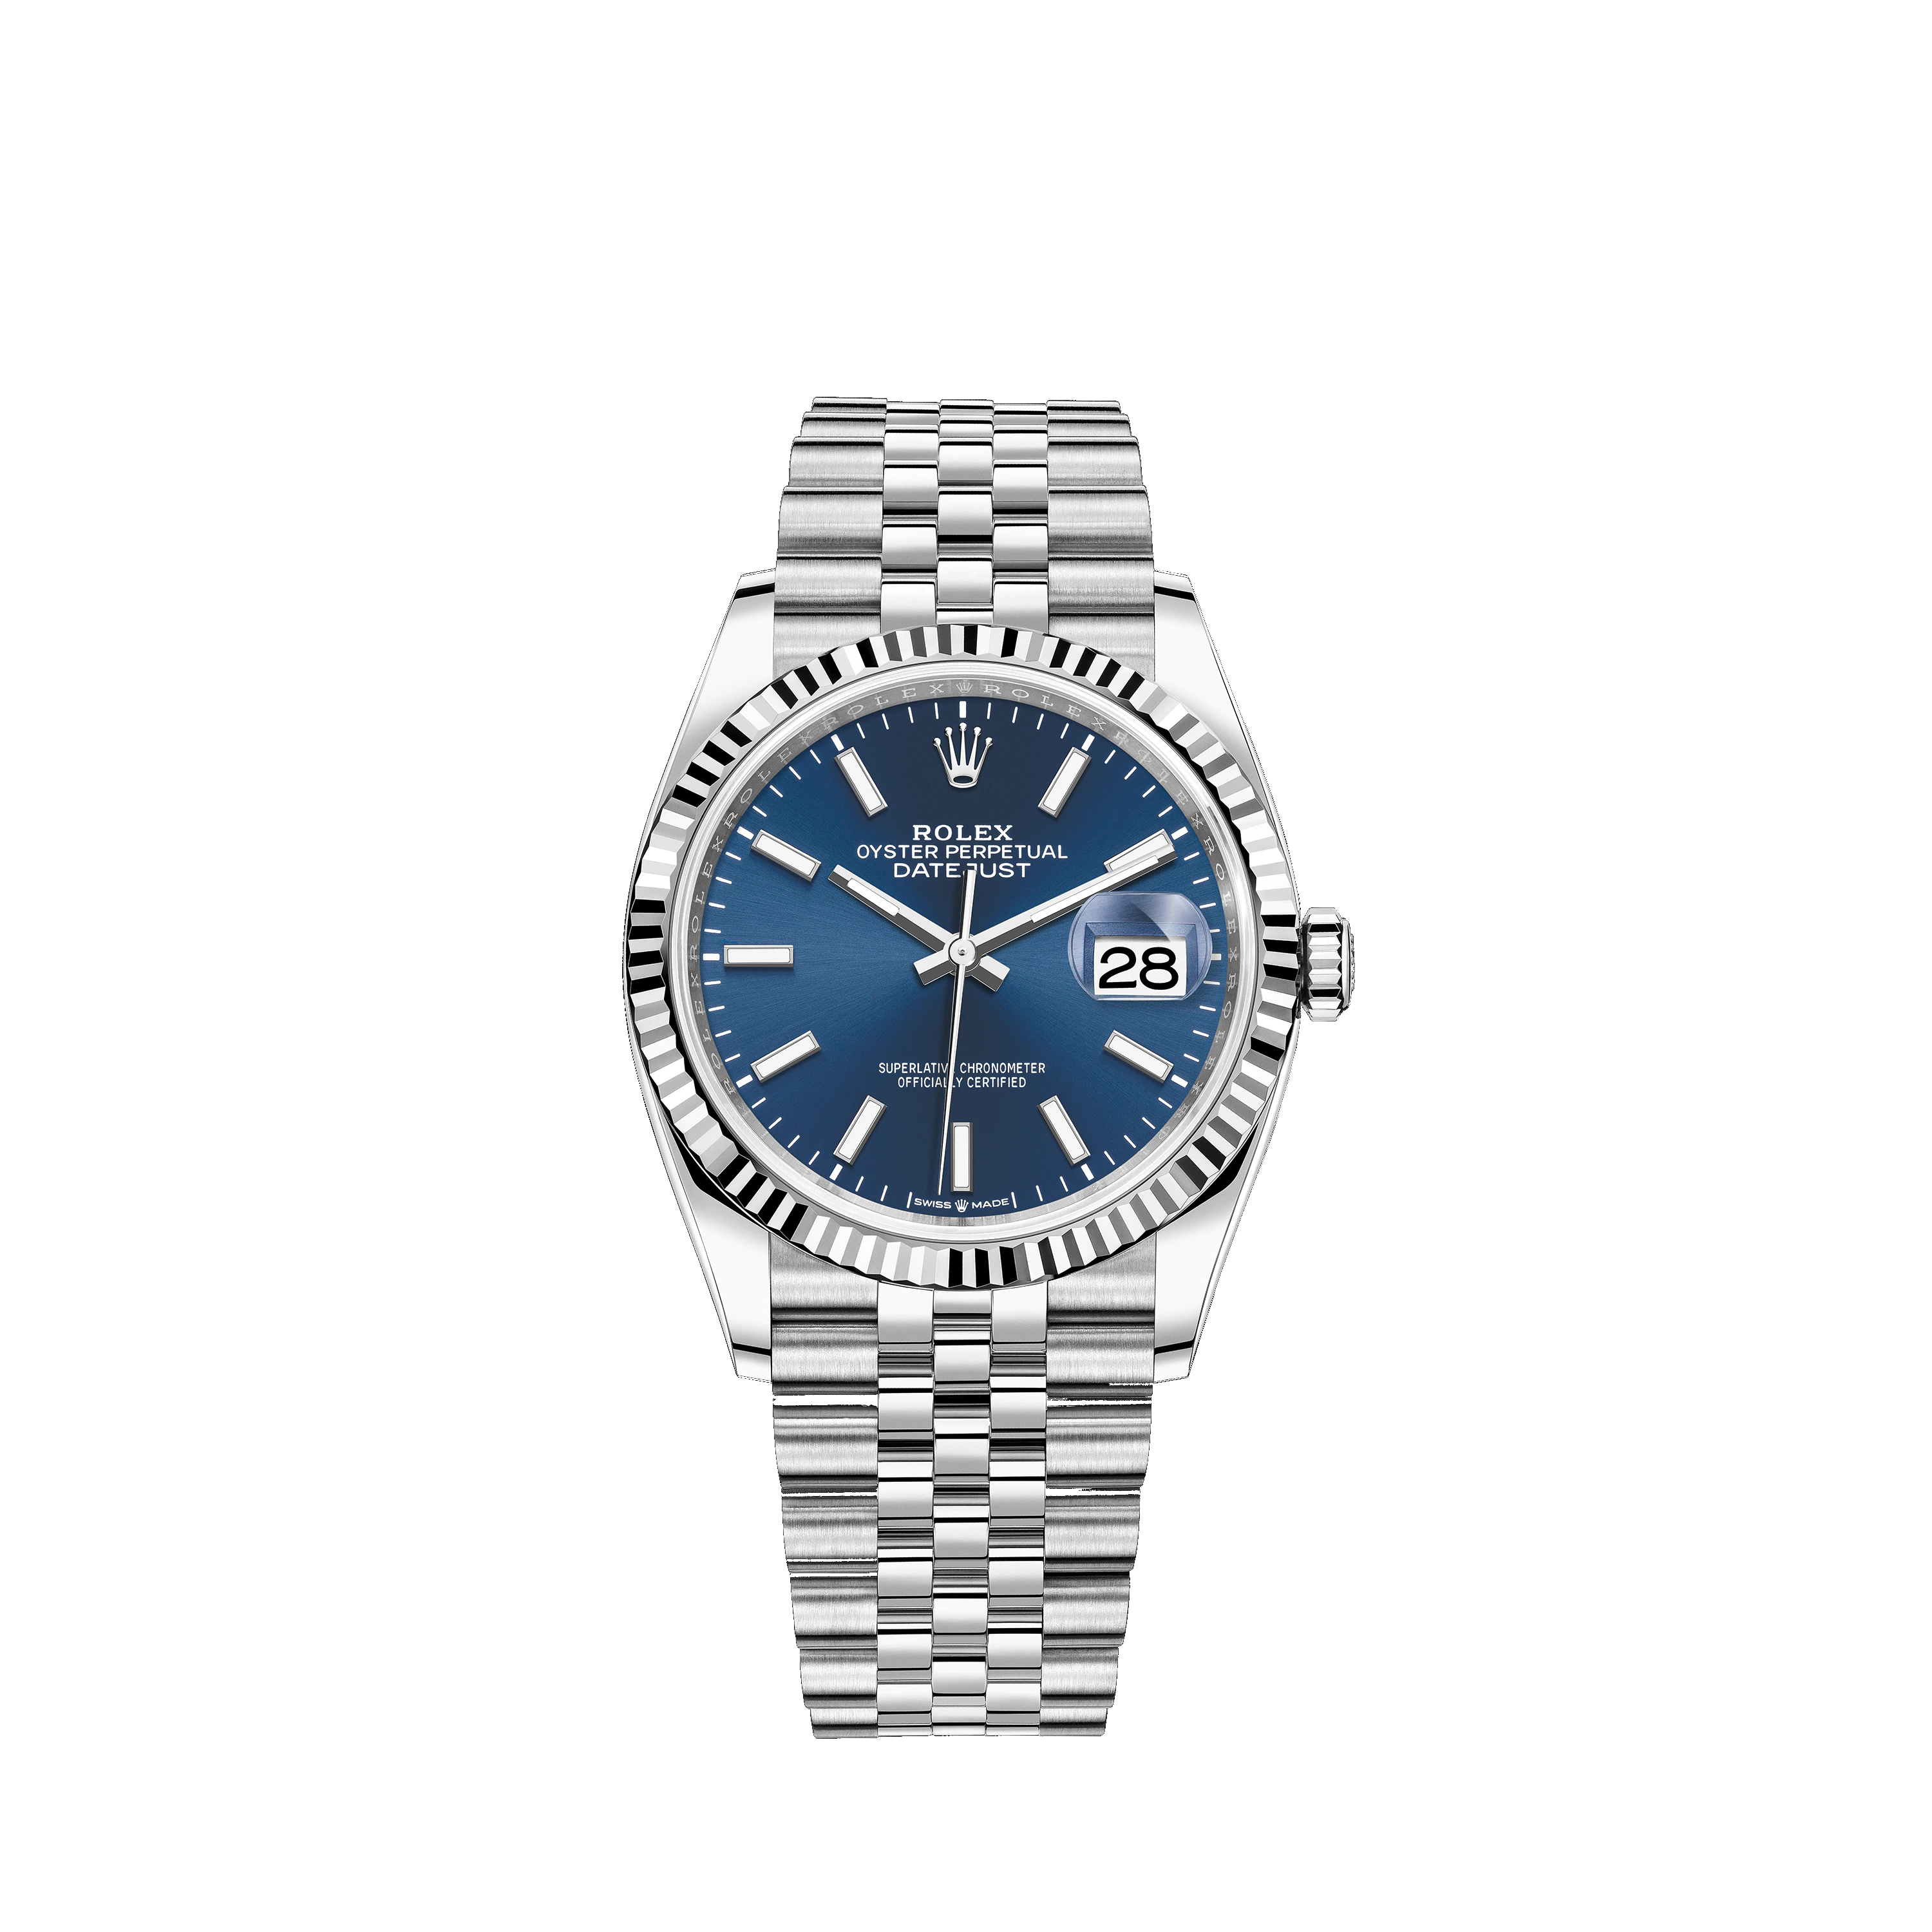 Datejust 36 126234 White Gold & Stainless Steel Watch (Blue)